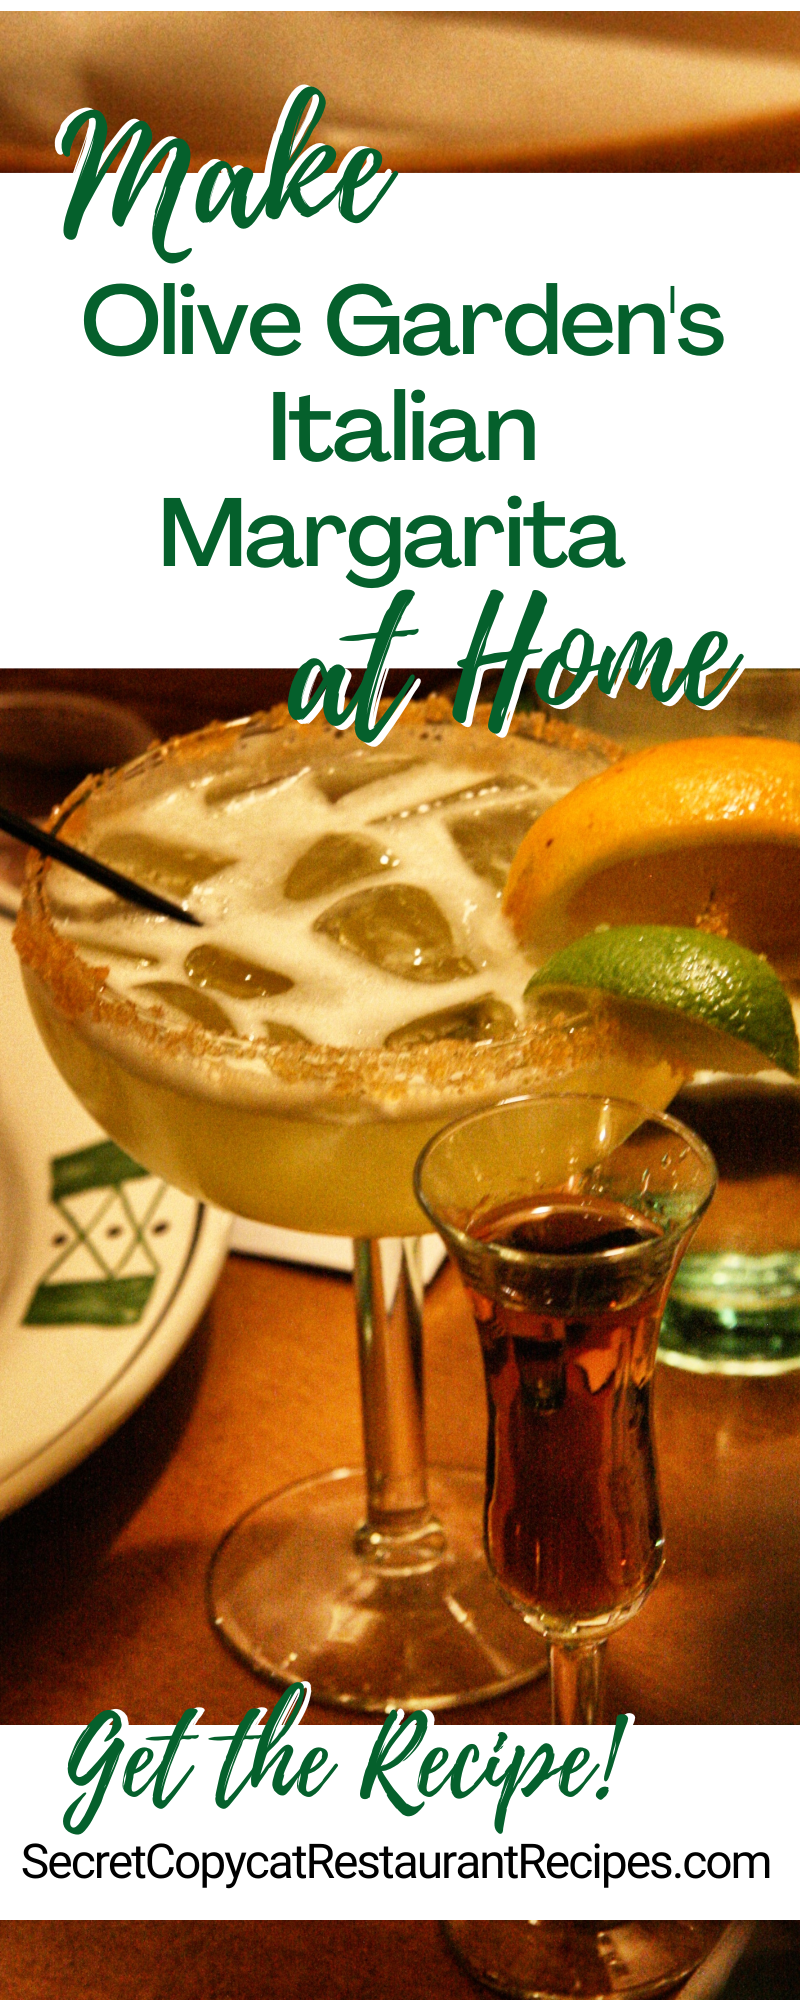 Italian-Inspired Cocktails at Olive Garden